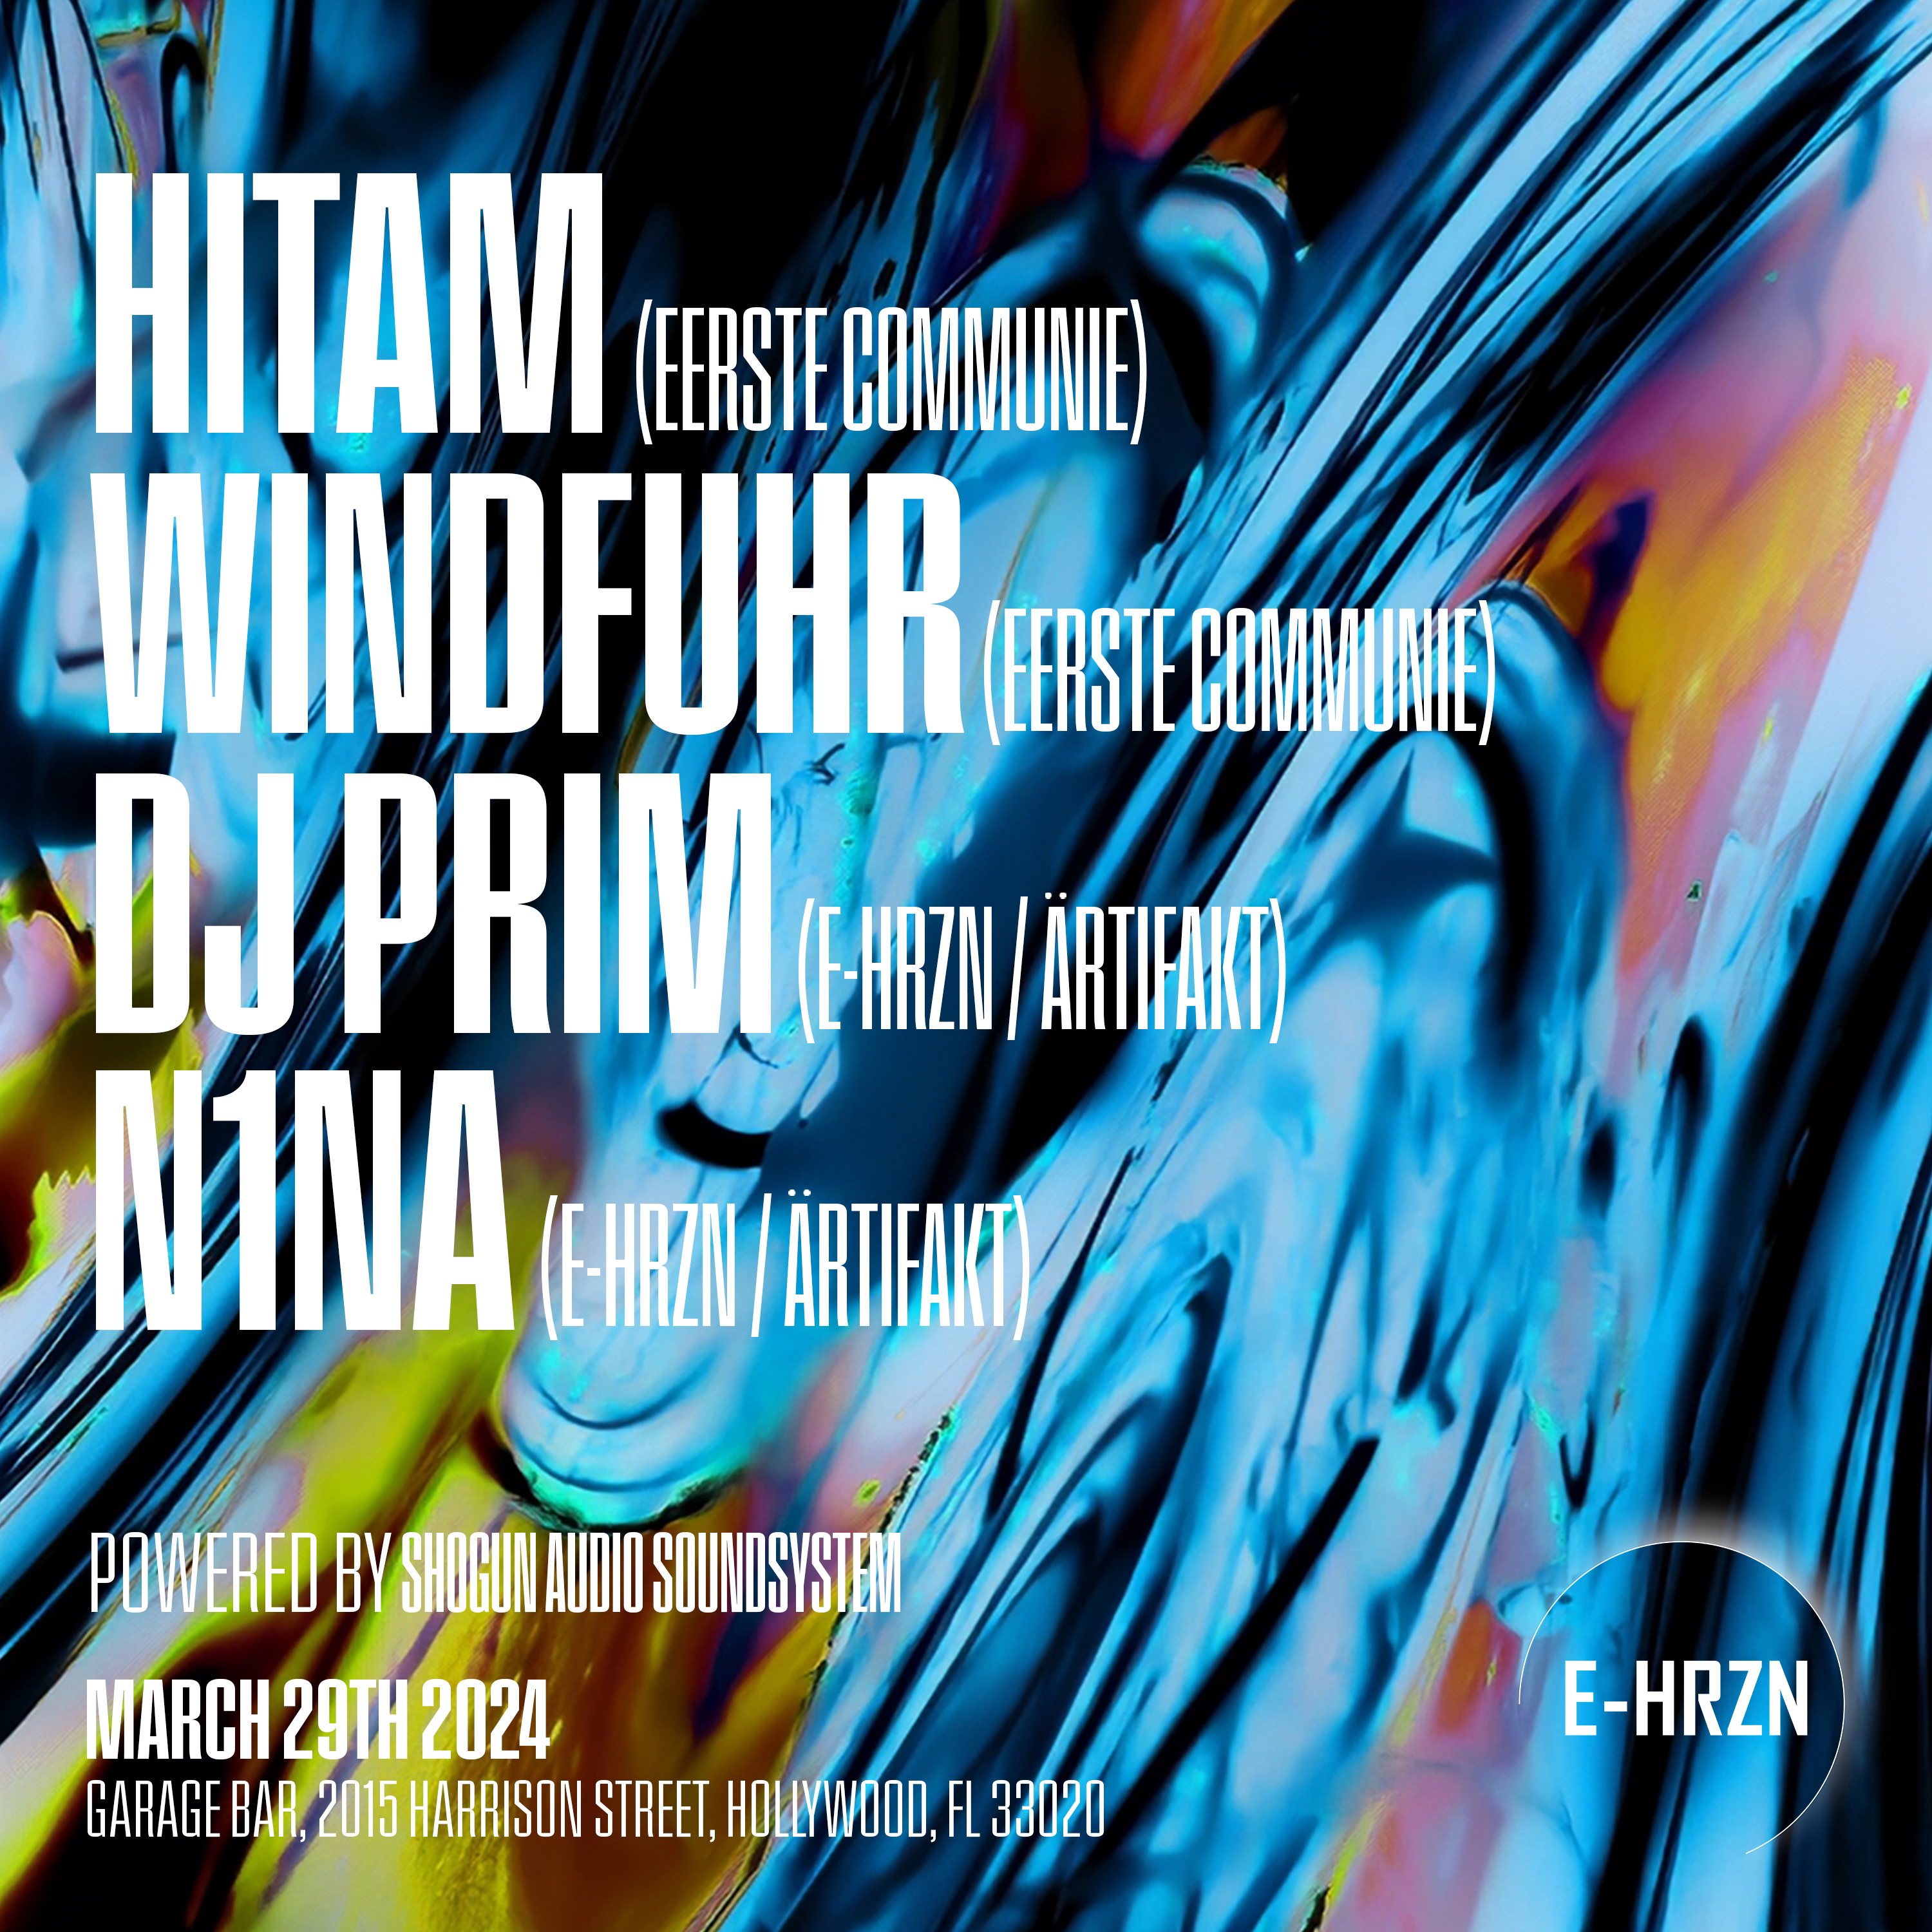 E-HRZN Records presents: Hitam and WINDFUHR - Página frontal